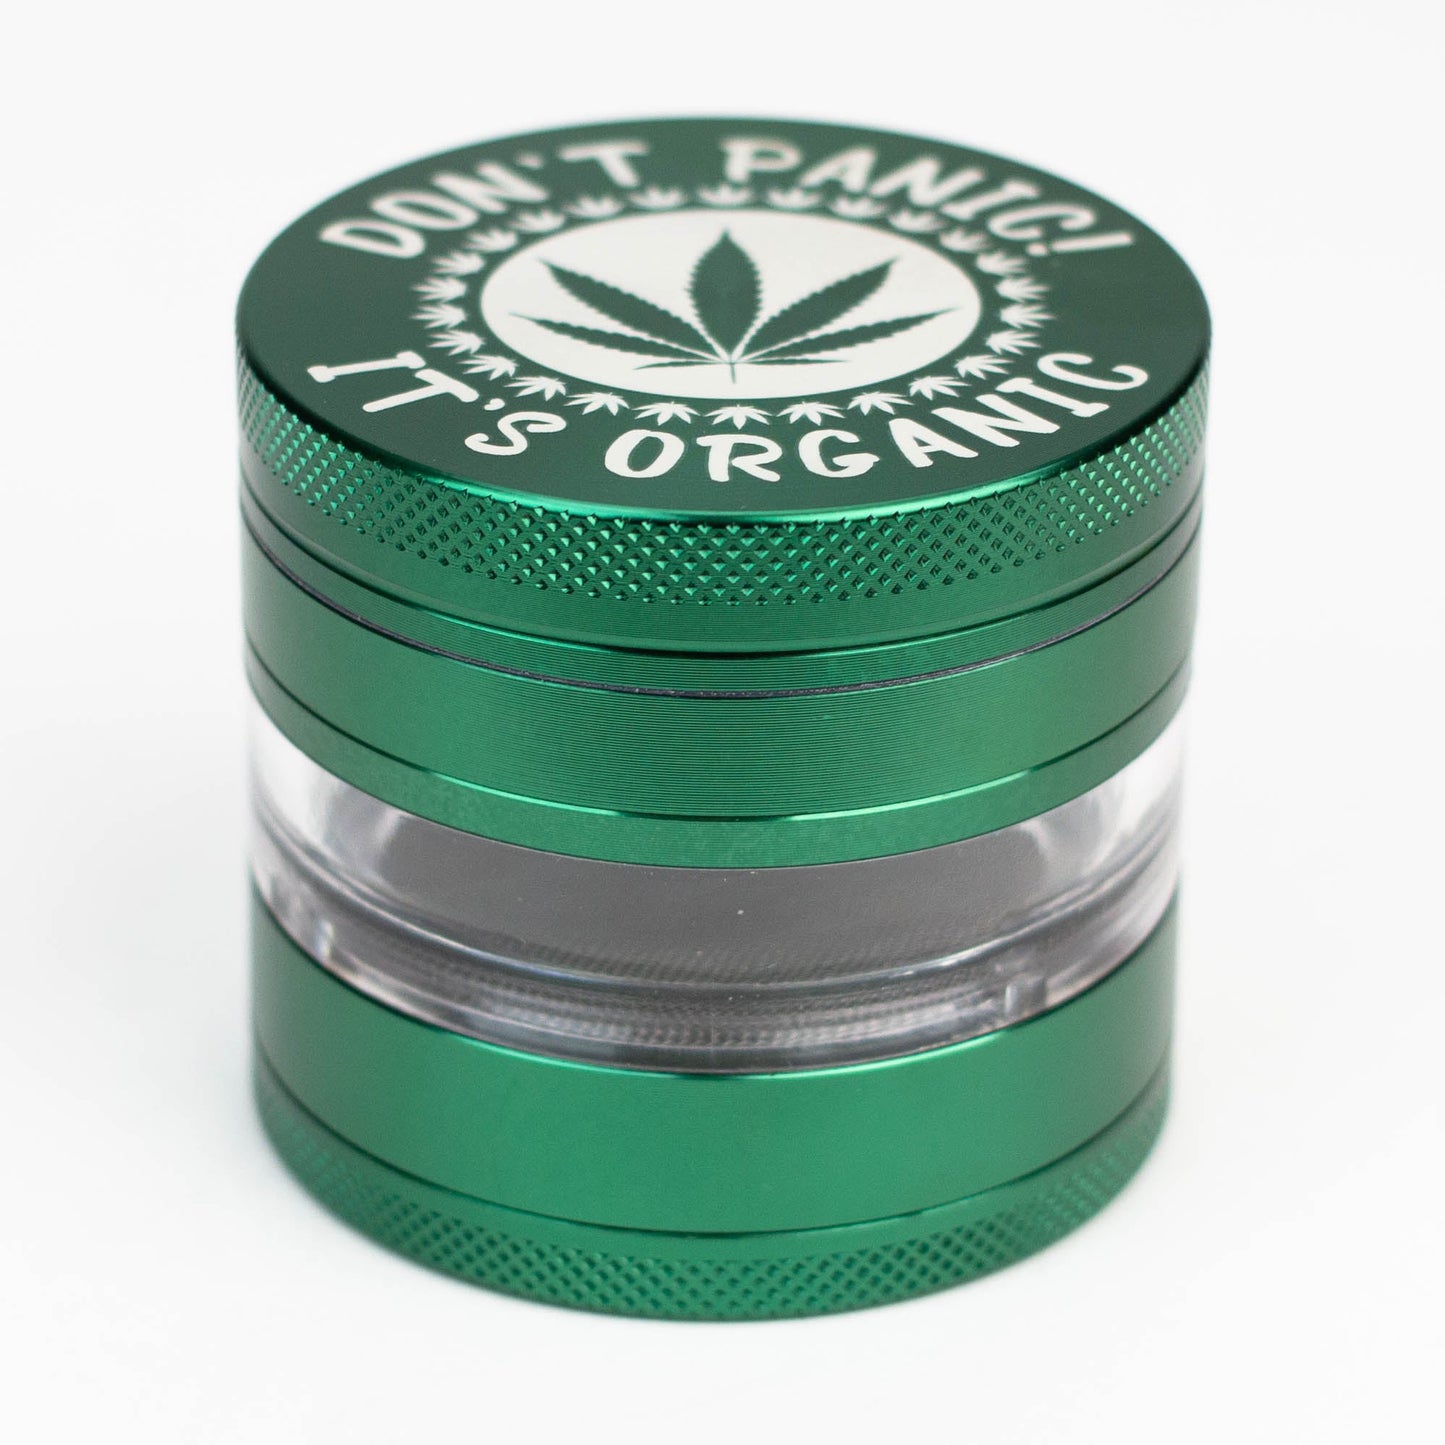 Heavy Duty Large "Don't Panic It's Organic" 4 Parts Weed Grinder Engraved in Canada_16